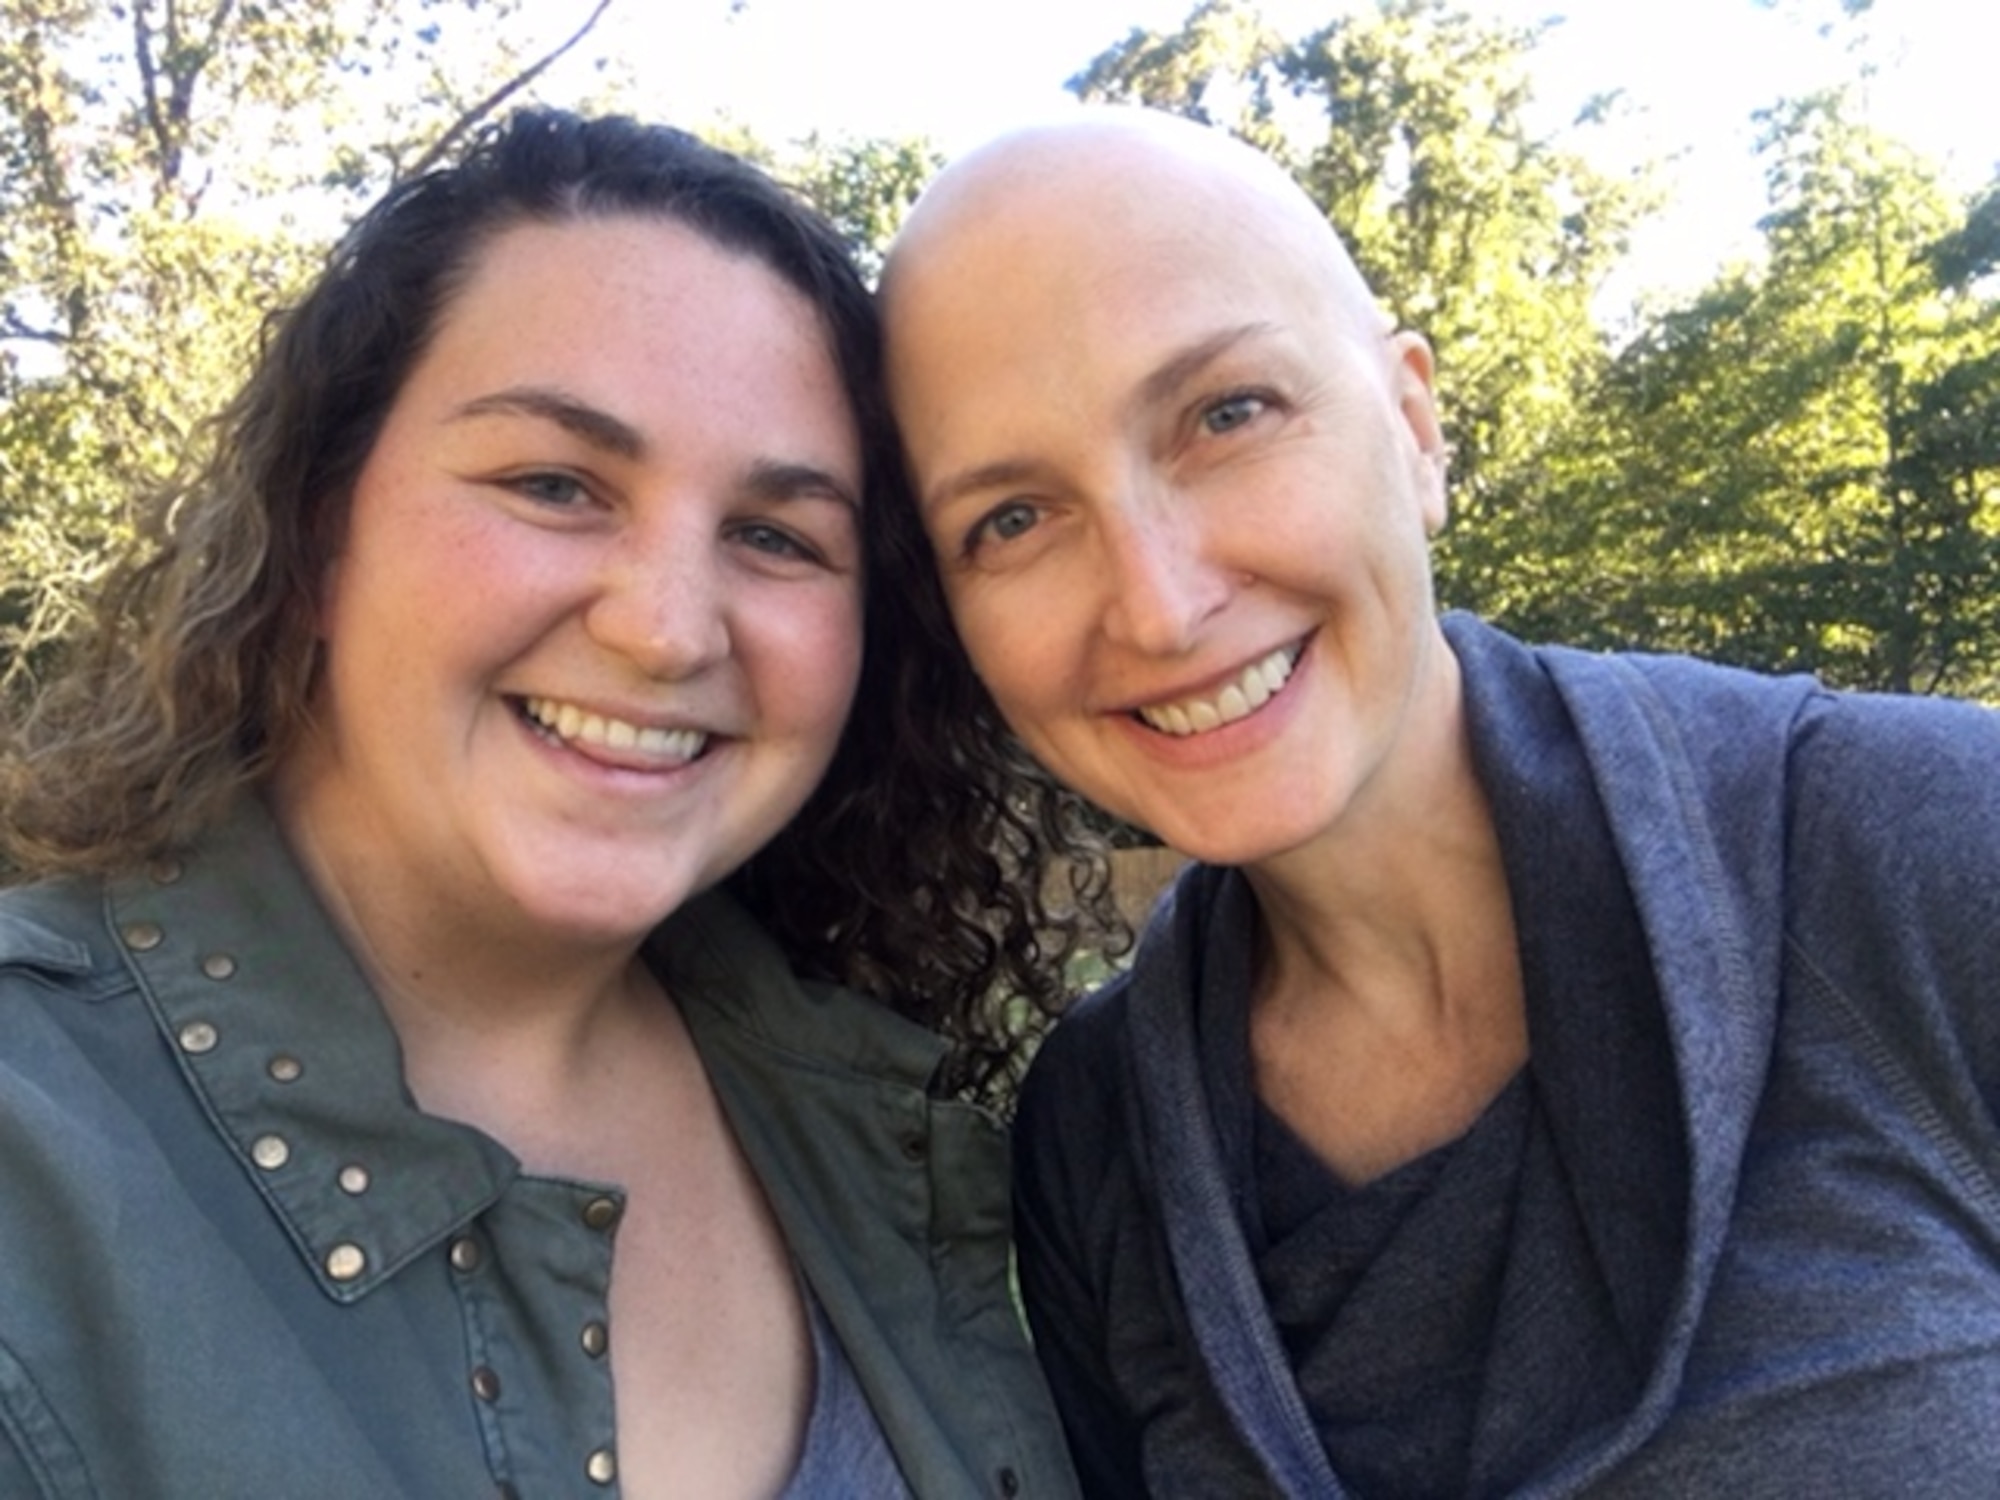 Airman Shawna Keyes (left), 4th Fighter Wing Public Affairs photojournalist, takes a photo with Leta Matte, Oct. 9, 2016, in Matthews, North Carolina. Matte has been undergoing chemotherapy treatment for breast cancer for the past two months. (U.S. Air Force photo by Airman Shawna L. Keyes)